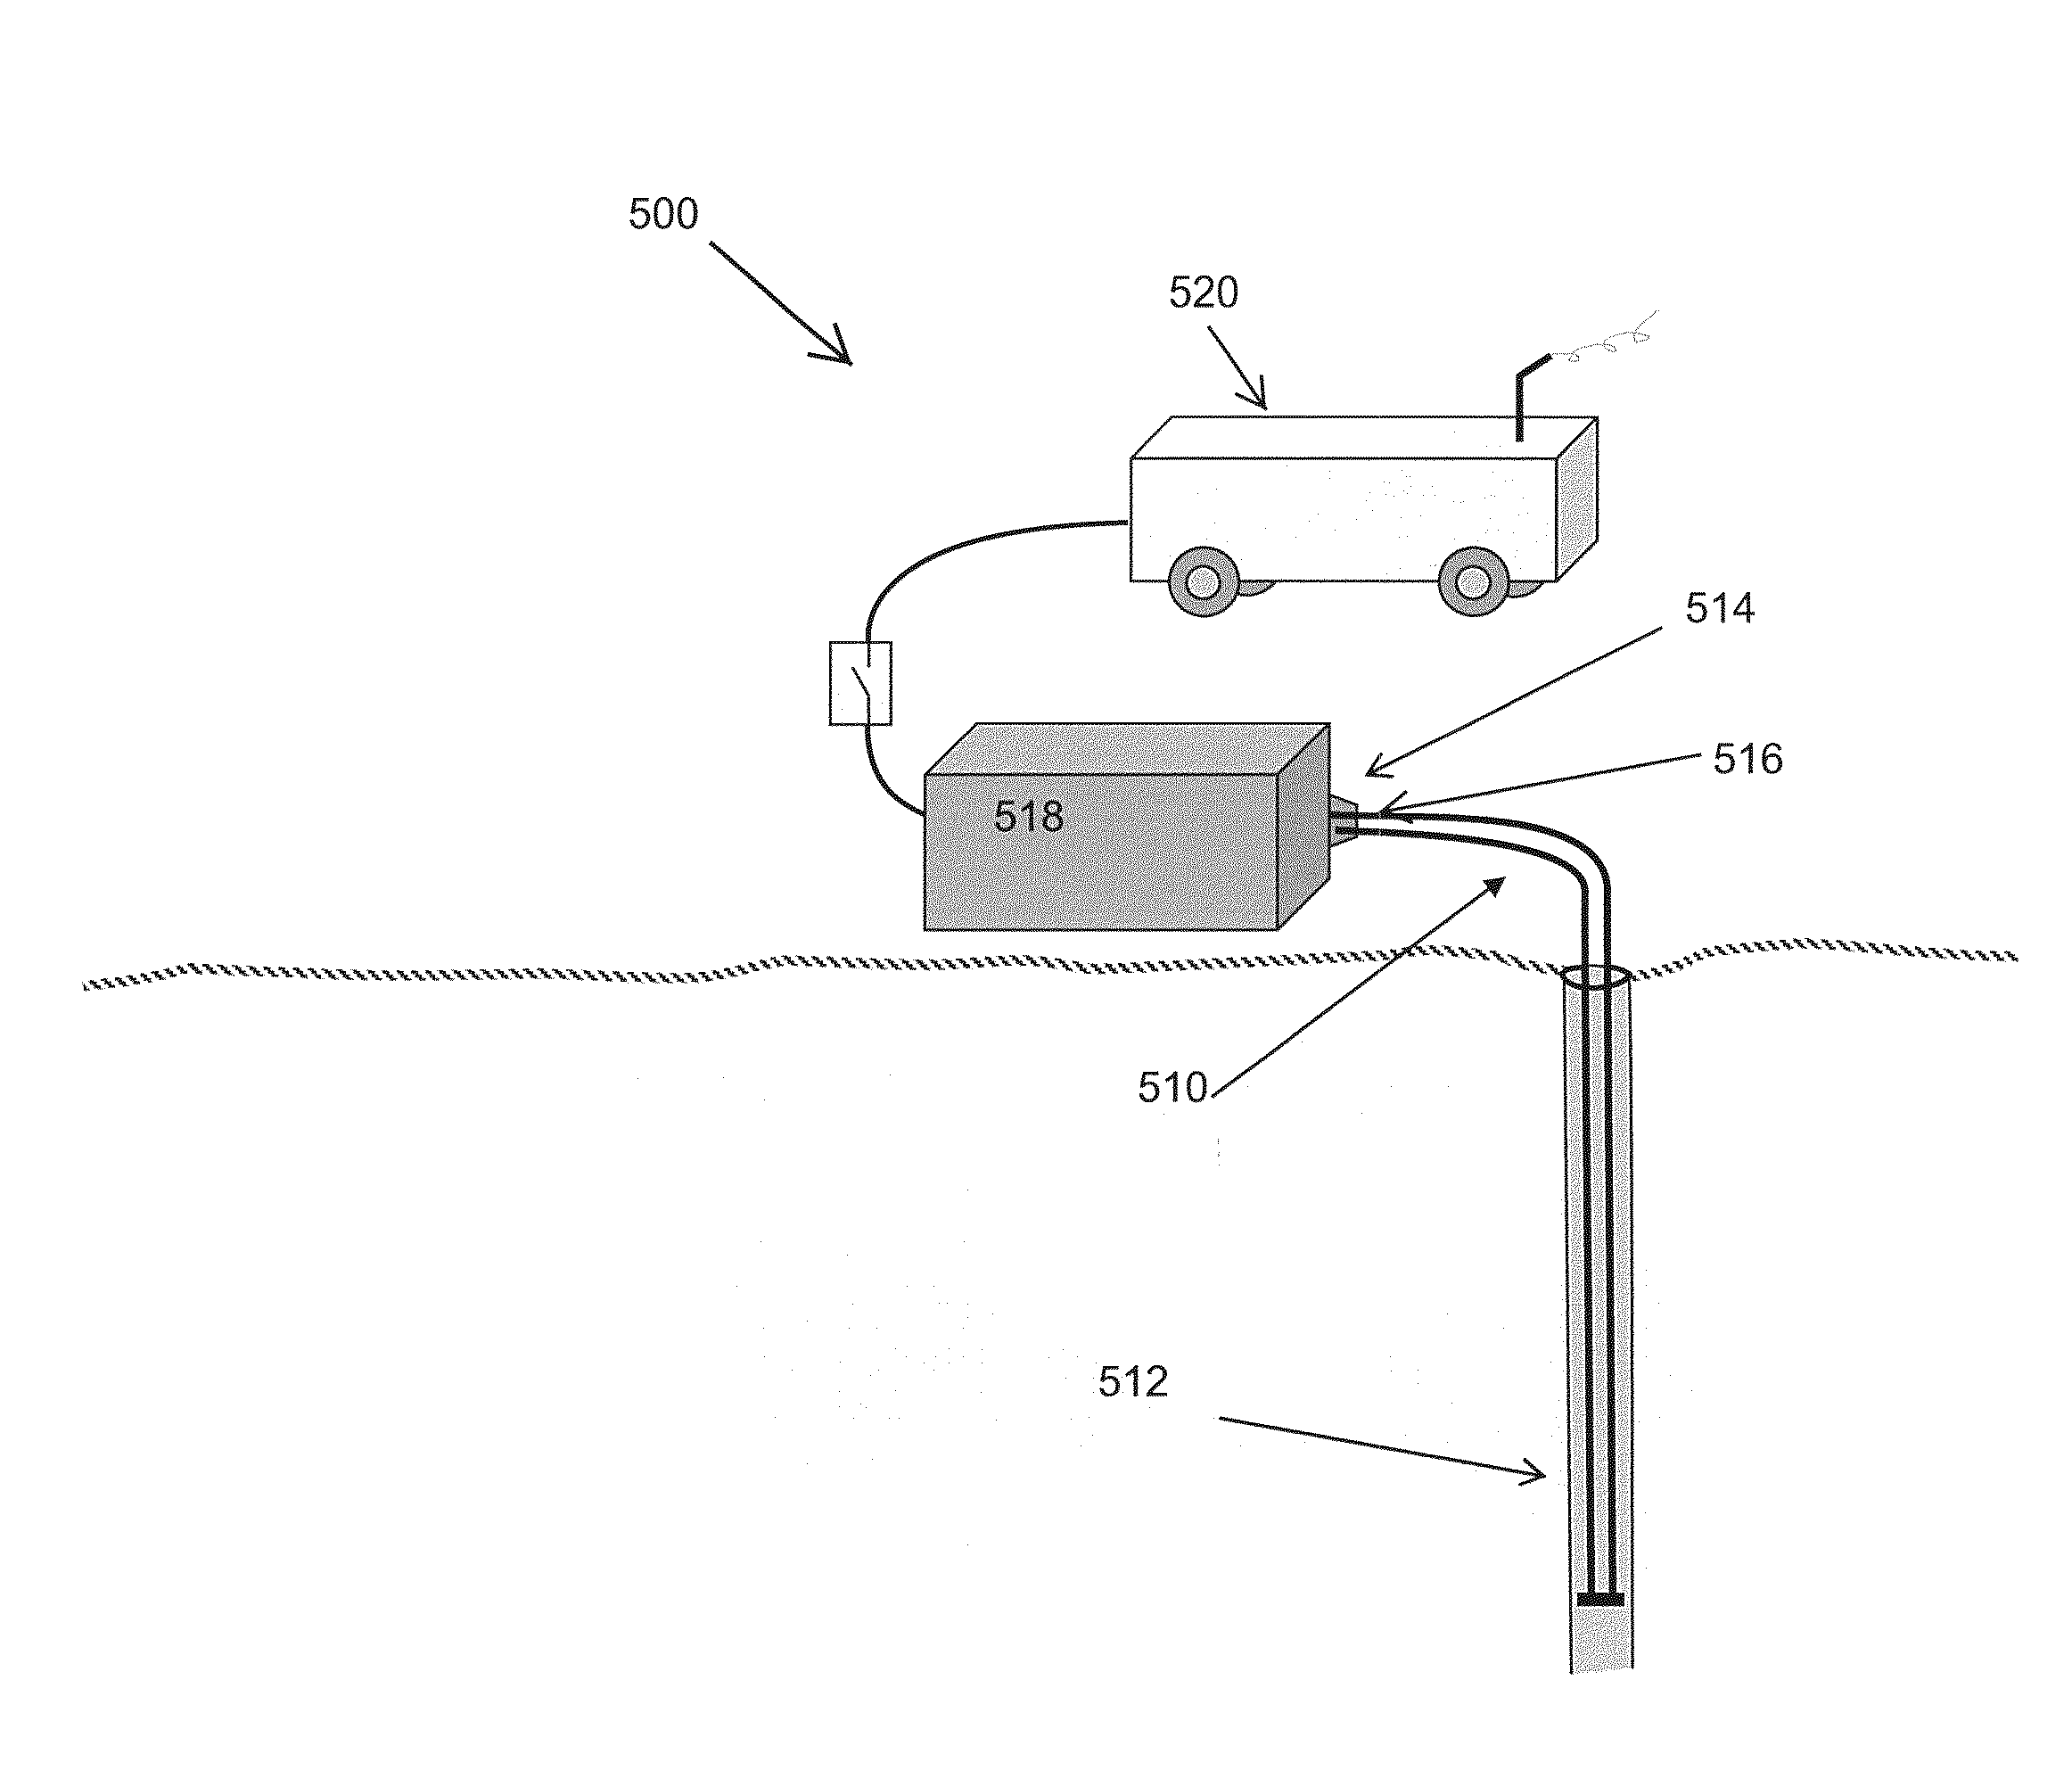 Apparatuses and methods for supplying electrical power to an electrocrushing drill